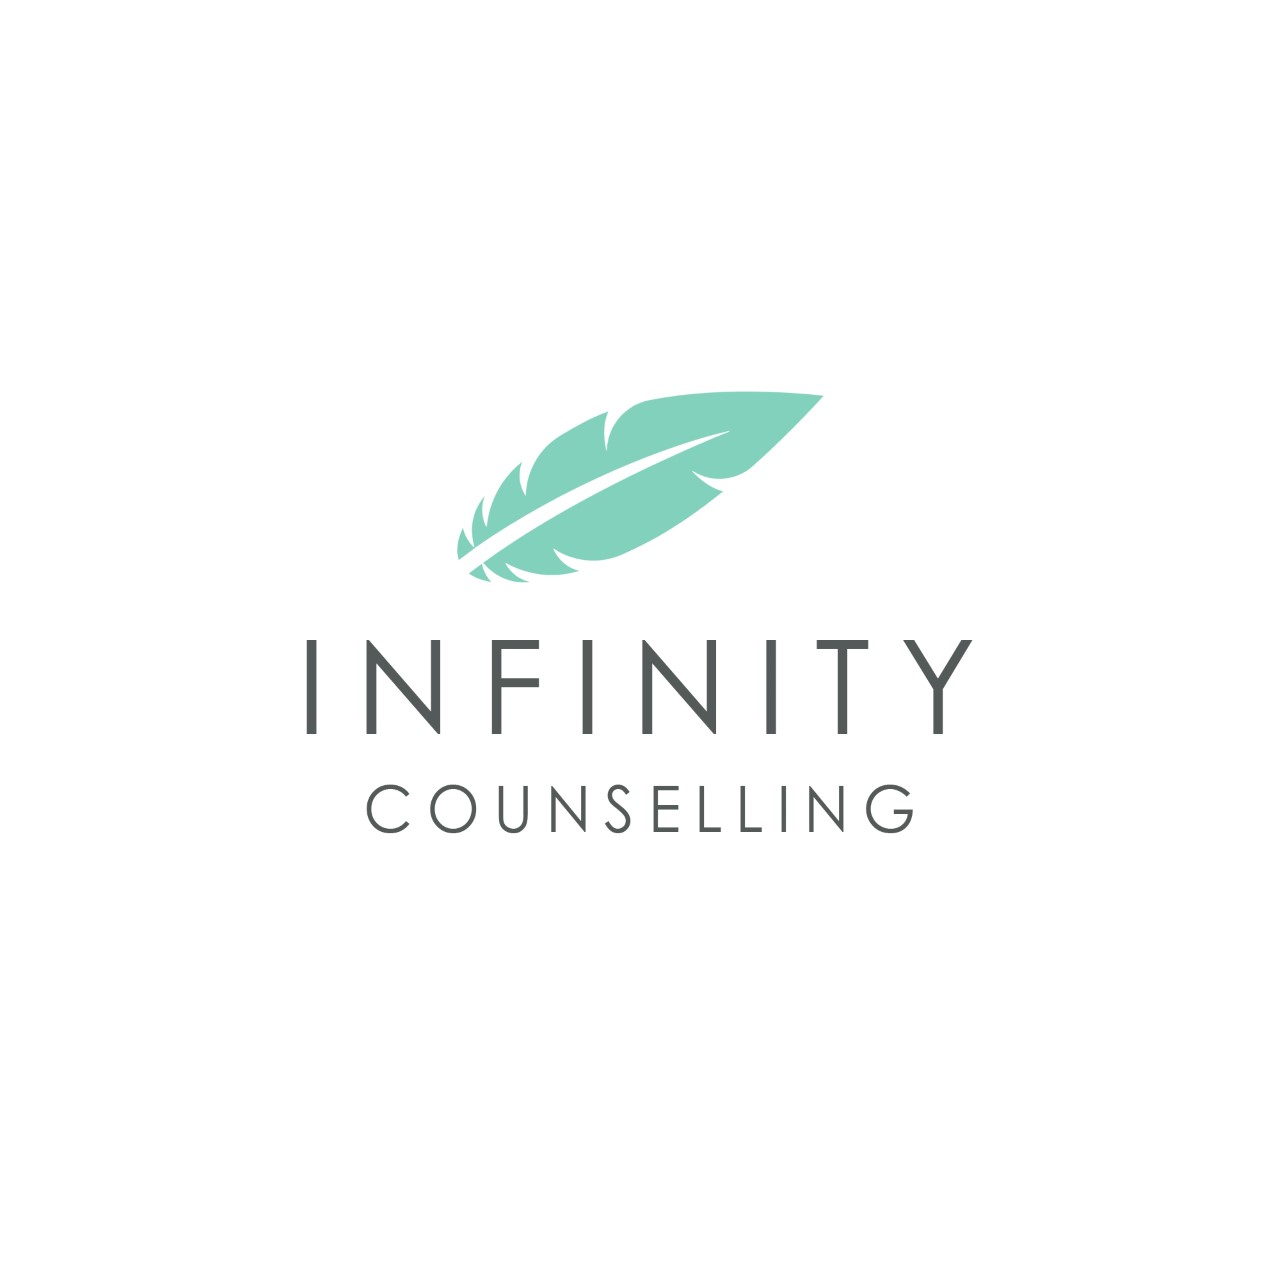 Infinity Counselling